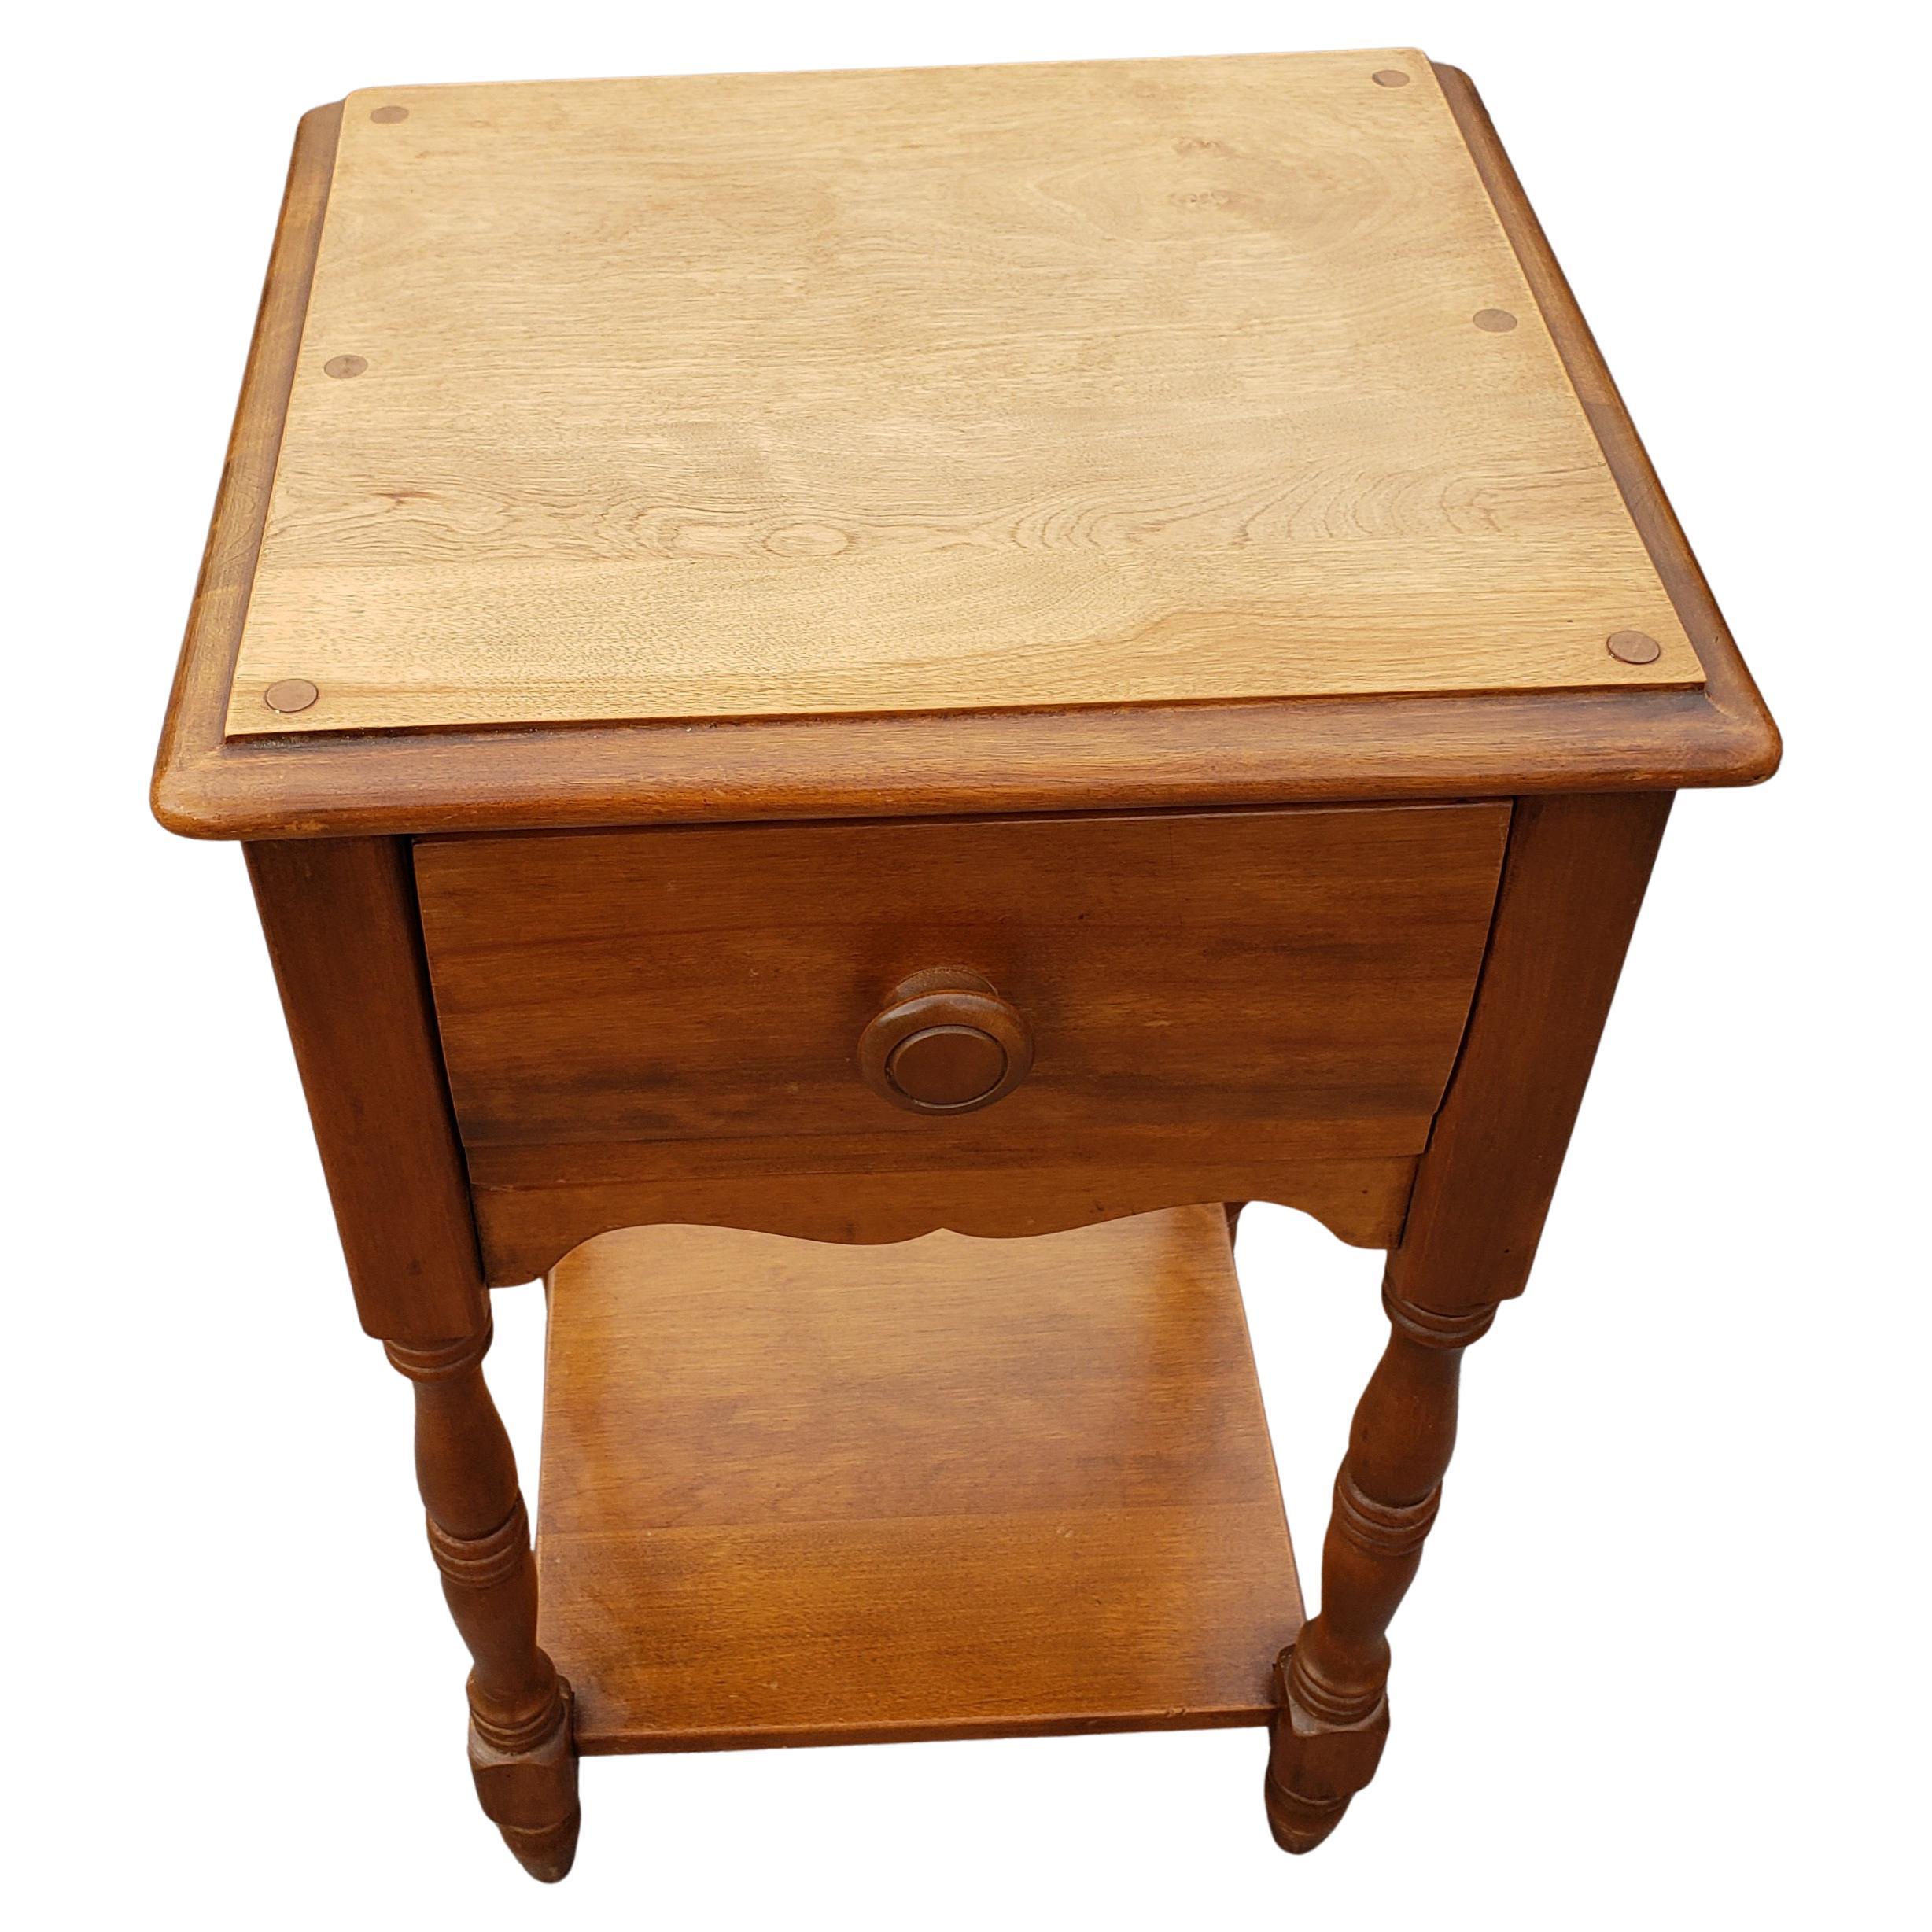 Antique solid maple nightstand side table, Circa 1940s.
Dovetail drawer with wooden knob handle. Nightstand Has been refinished.
Very good condition. Maple bed frame is for illustrative purpose and is not included in this listing, however